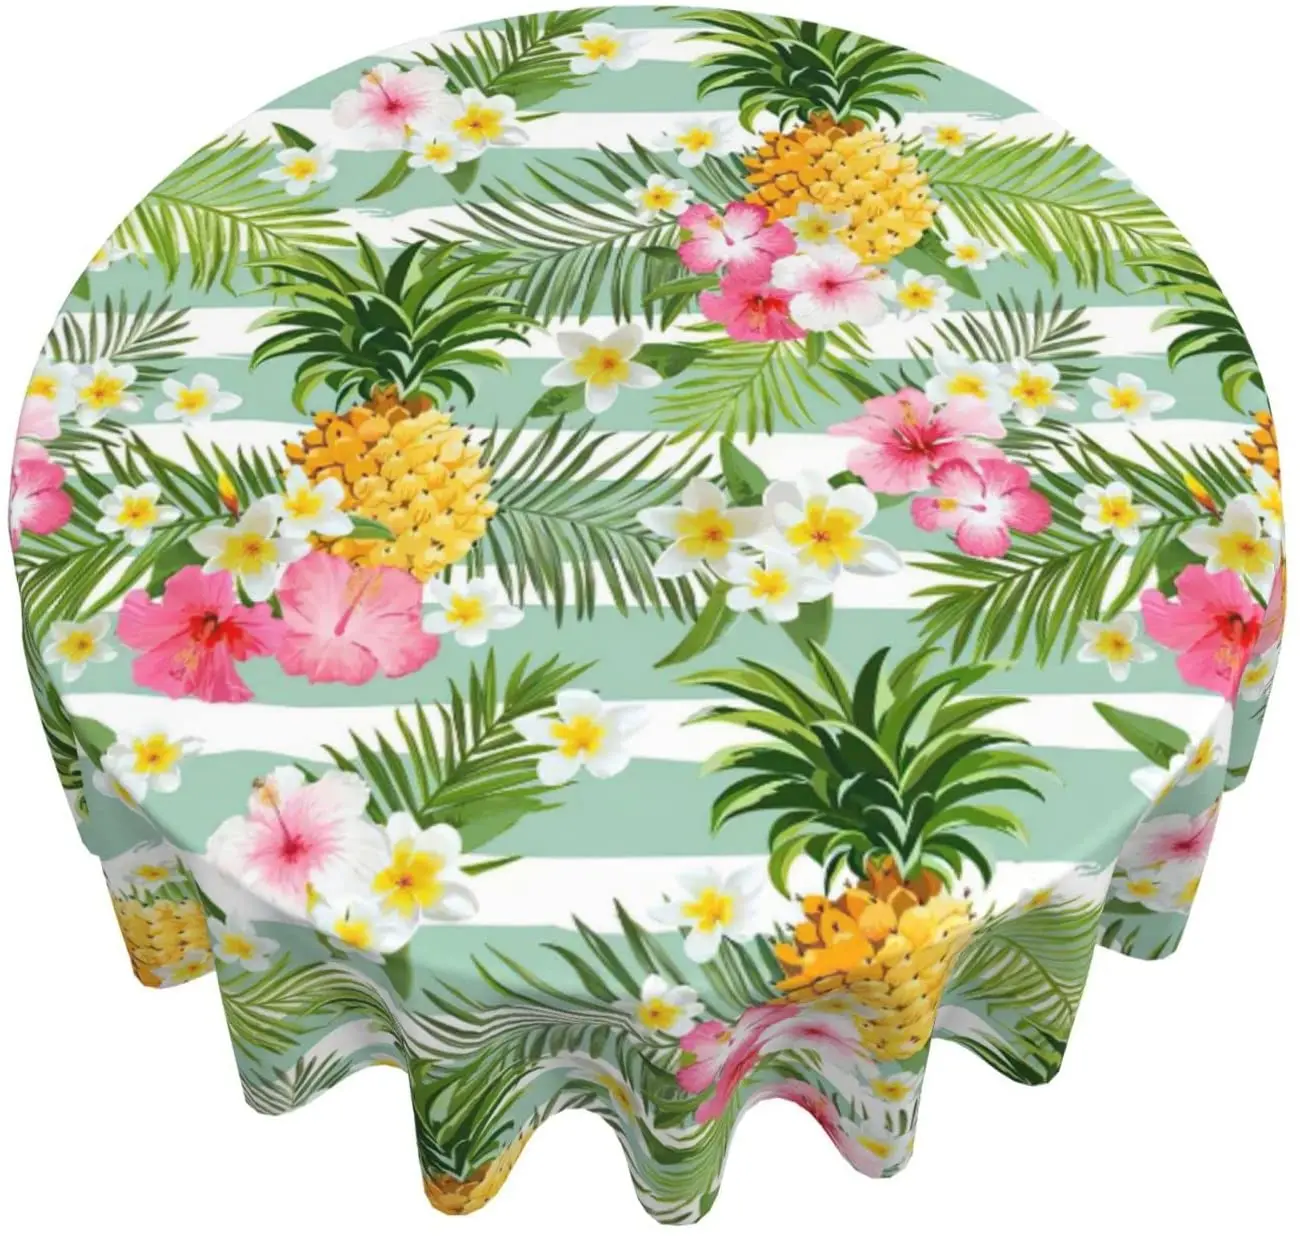 

Pineapple Tablecloth Tropical Palm Leaves and Flowers Round Table Cloths Summer Table Cover for Dining Picnic Party Decor